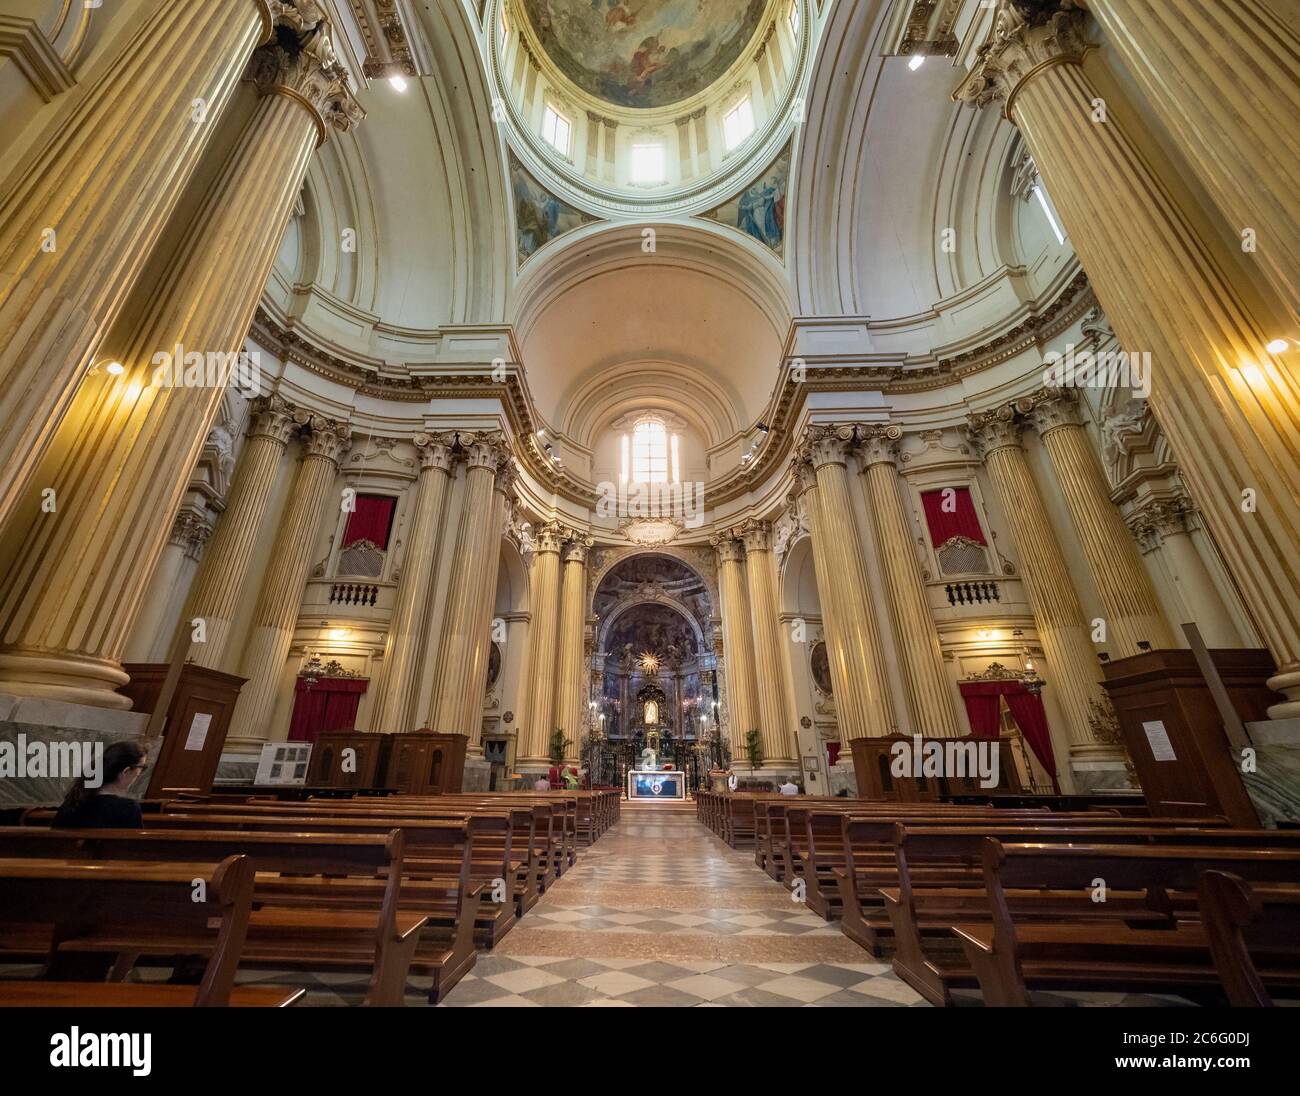 The aisle of the church of the Sanctuary of the Madonna di San Luca, Bologna, Italy. Stock Photo